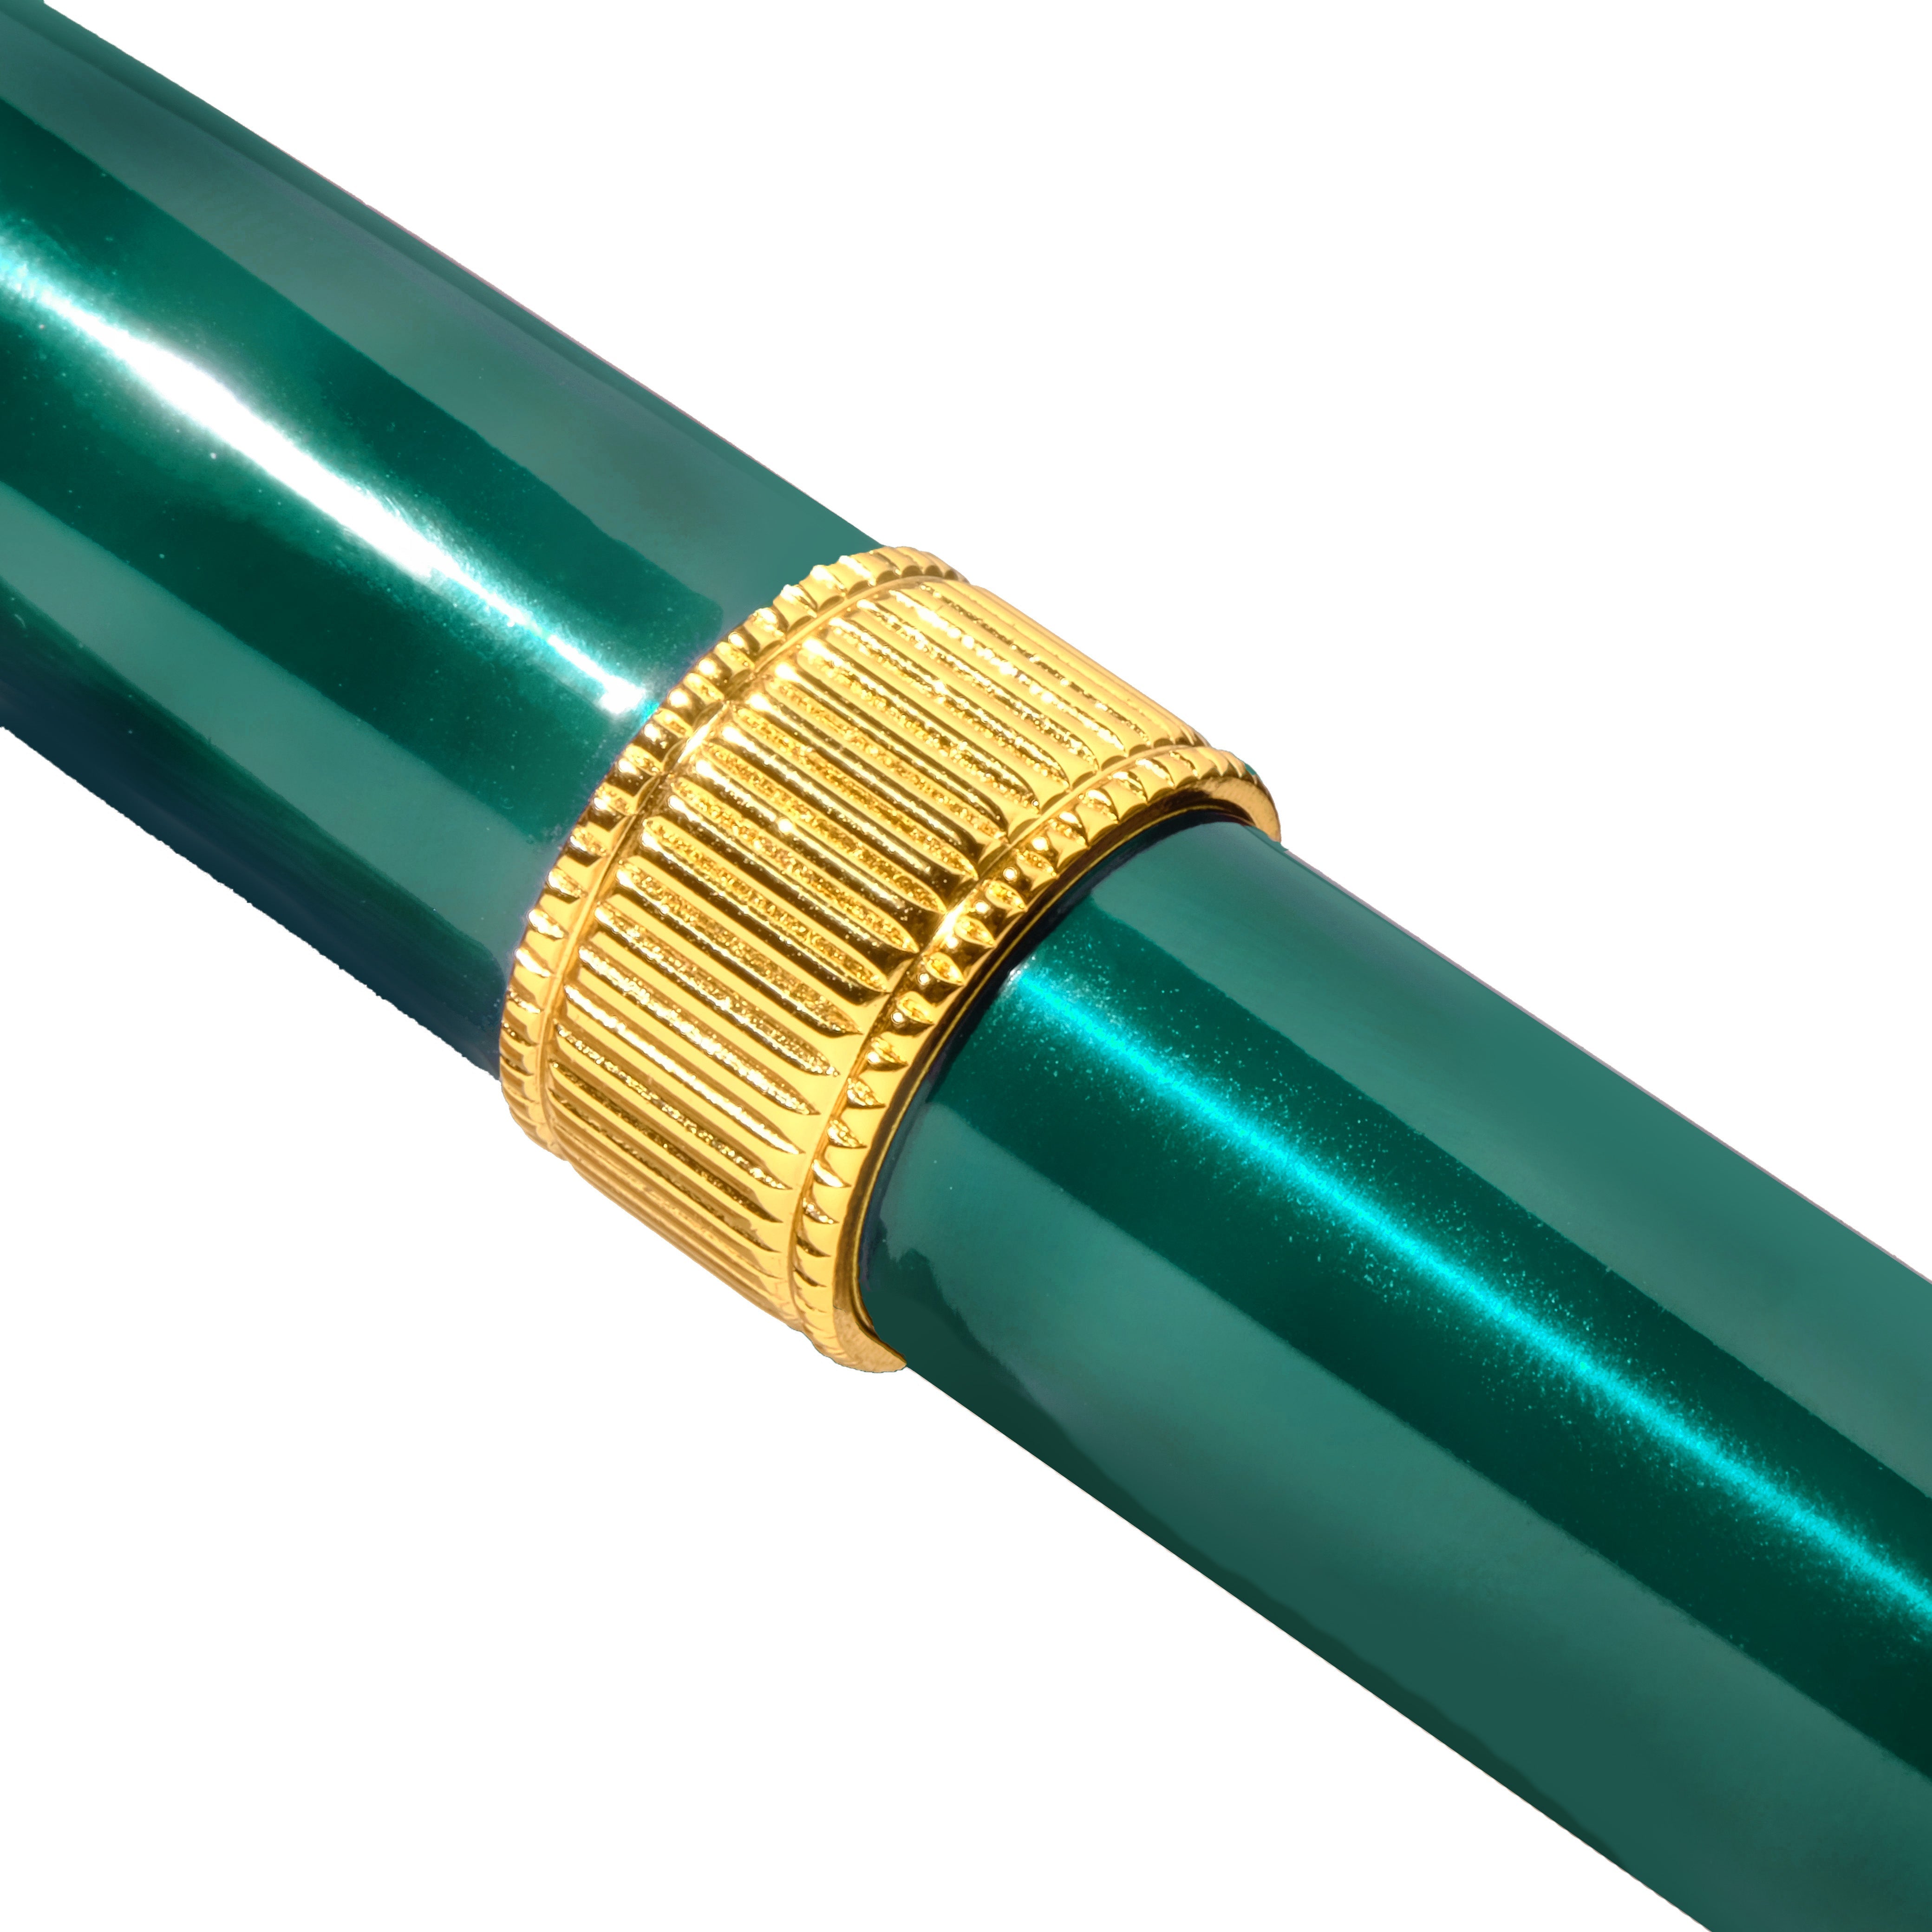 The Joule Fountain Pen - Engravers Teal